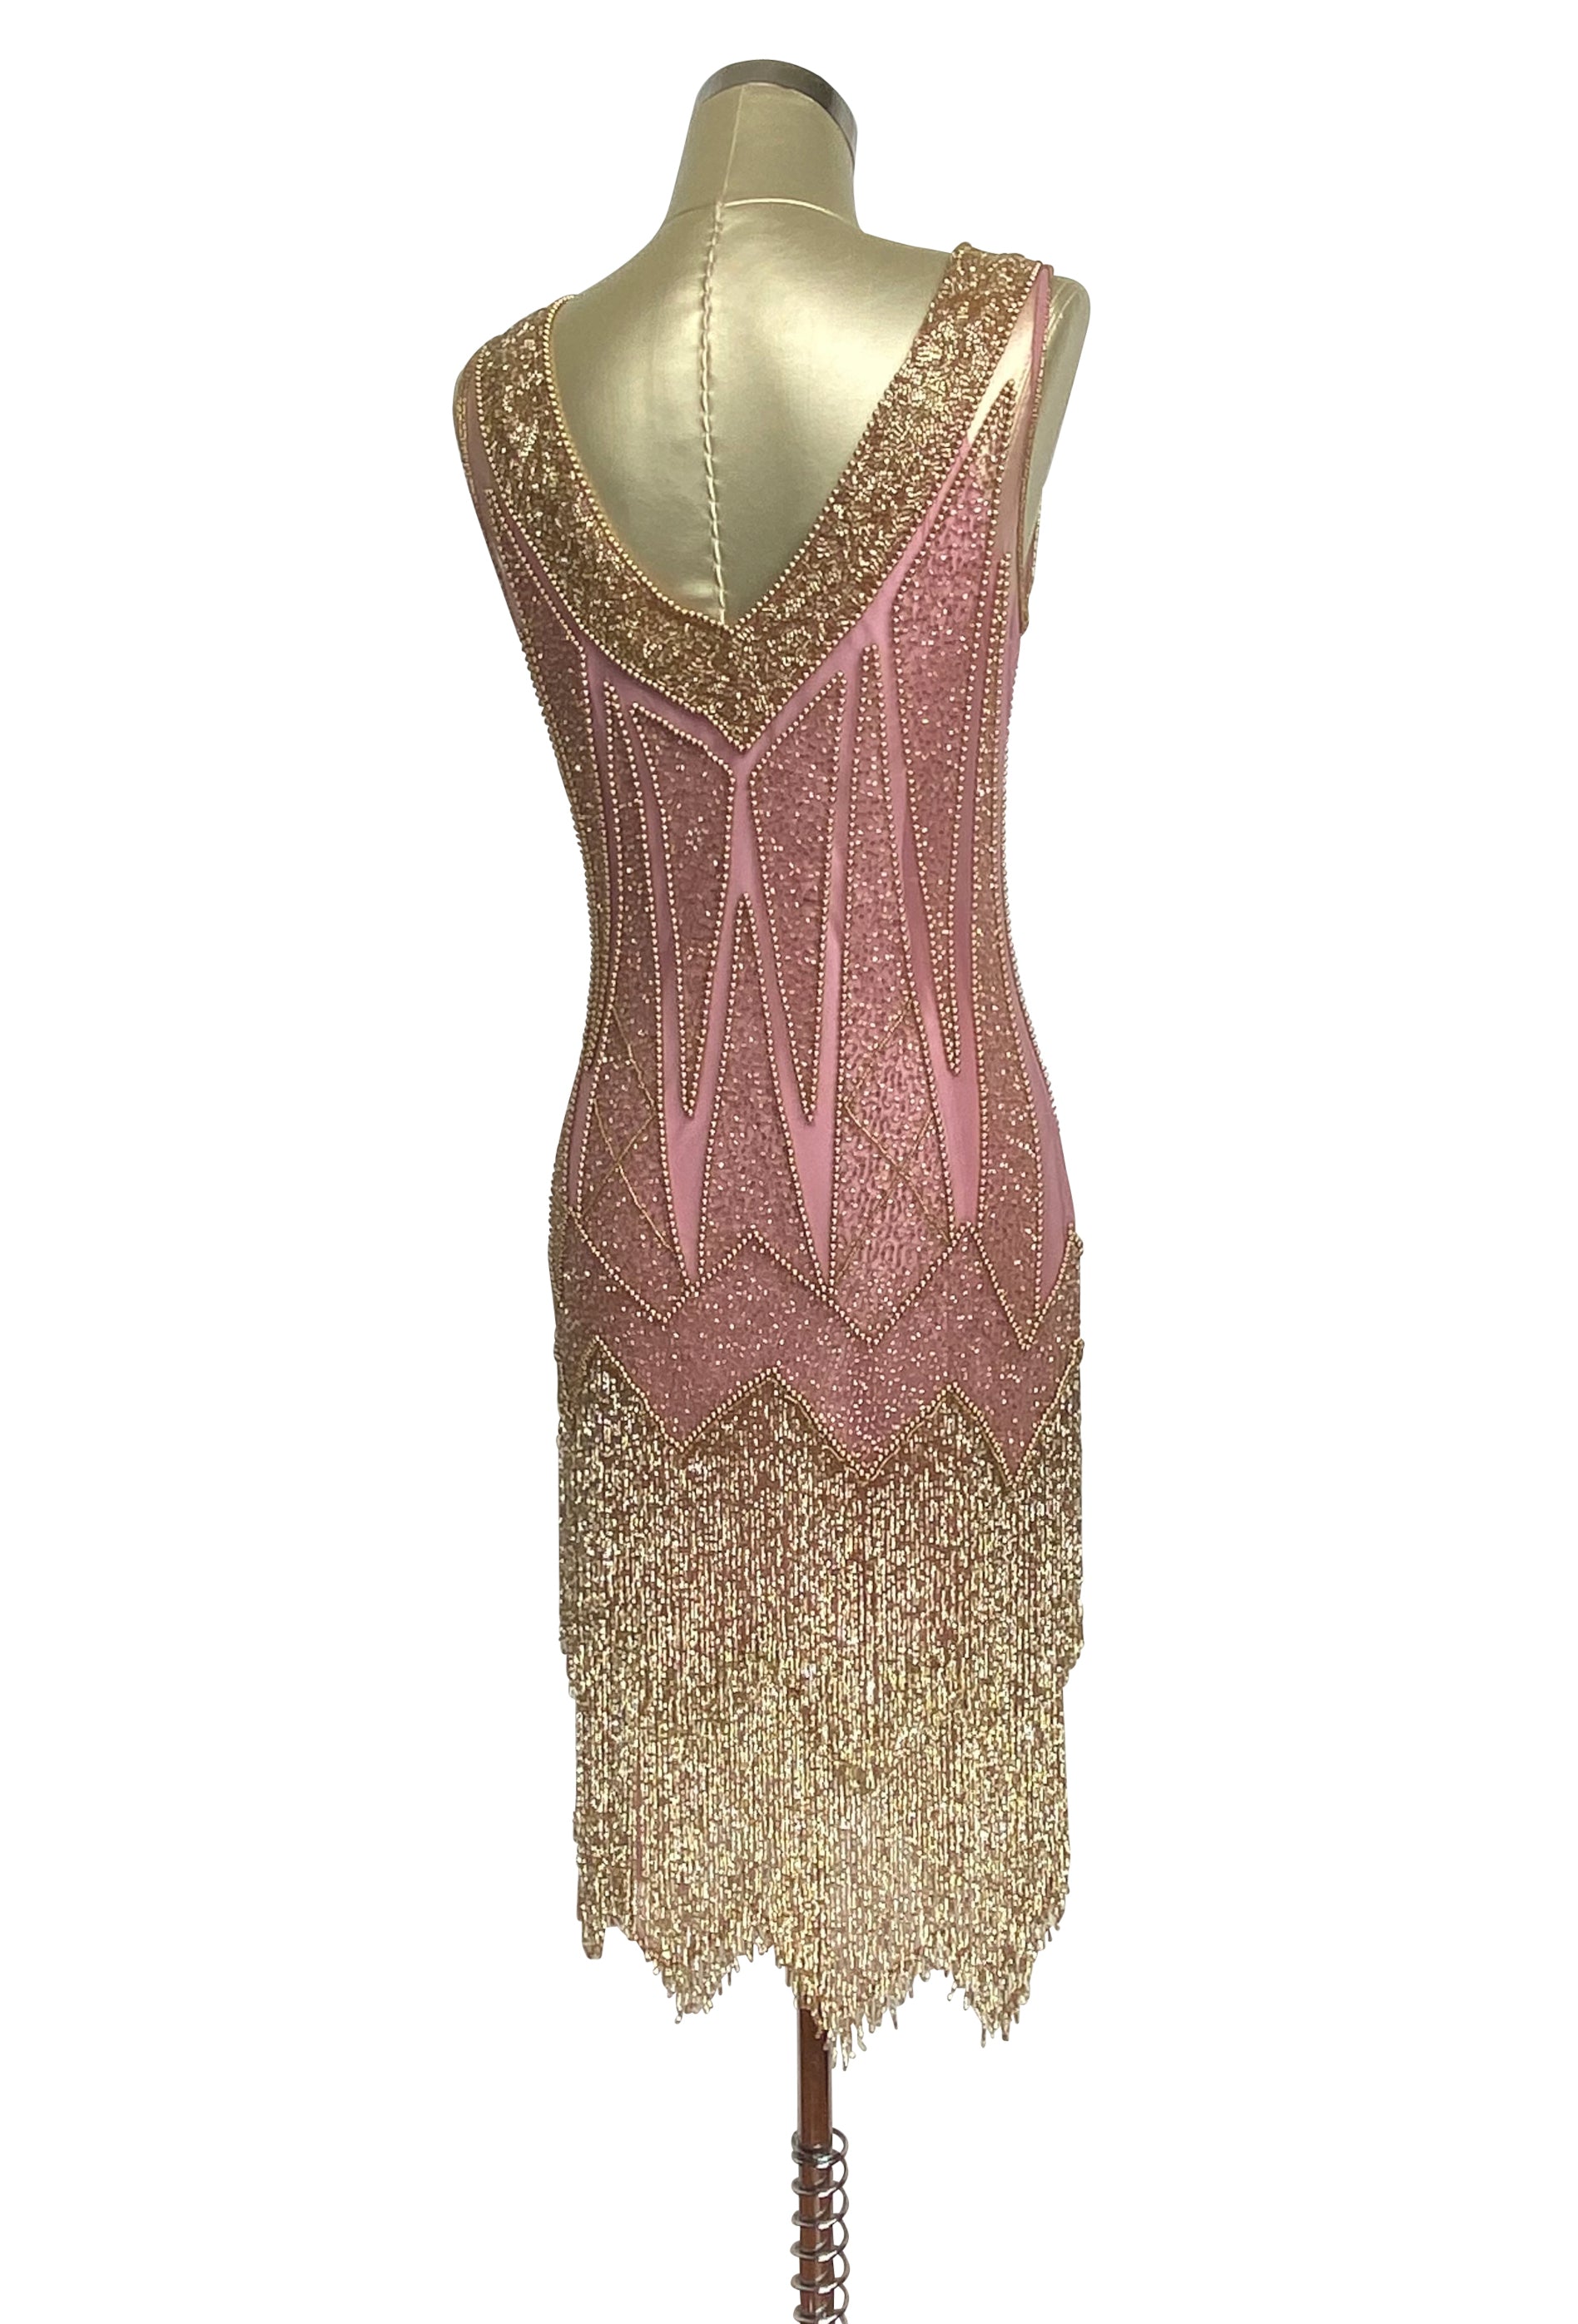 1920's Flapper Fringe Gatsby Party Dress - The Zenith - Gold on Rose P